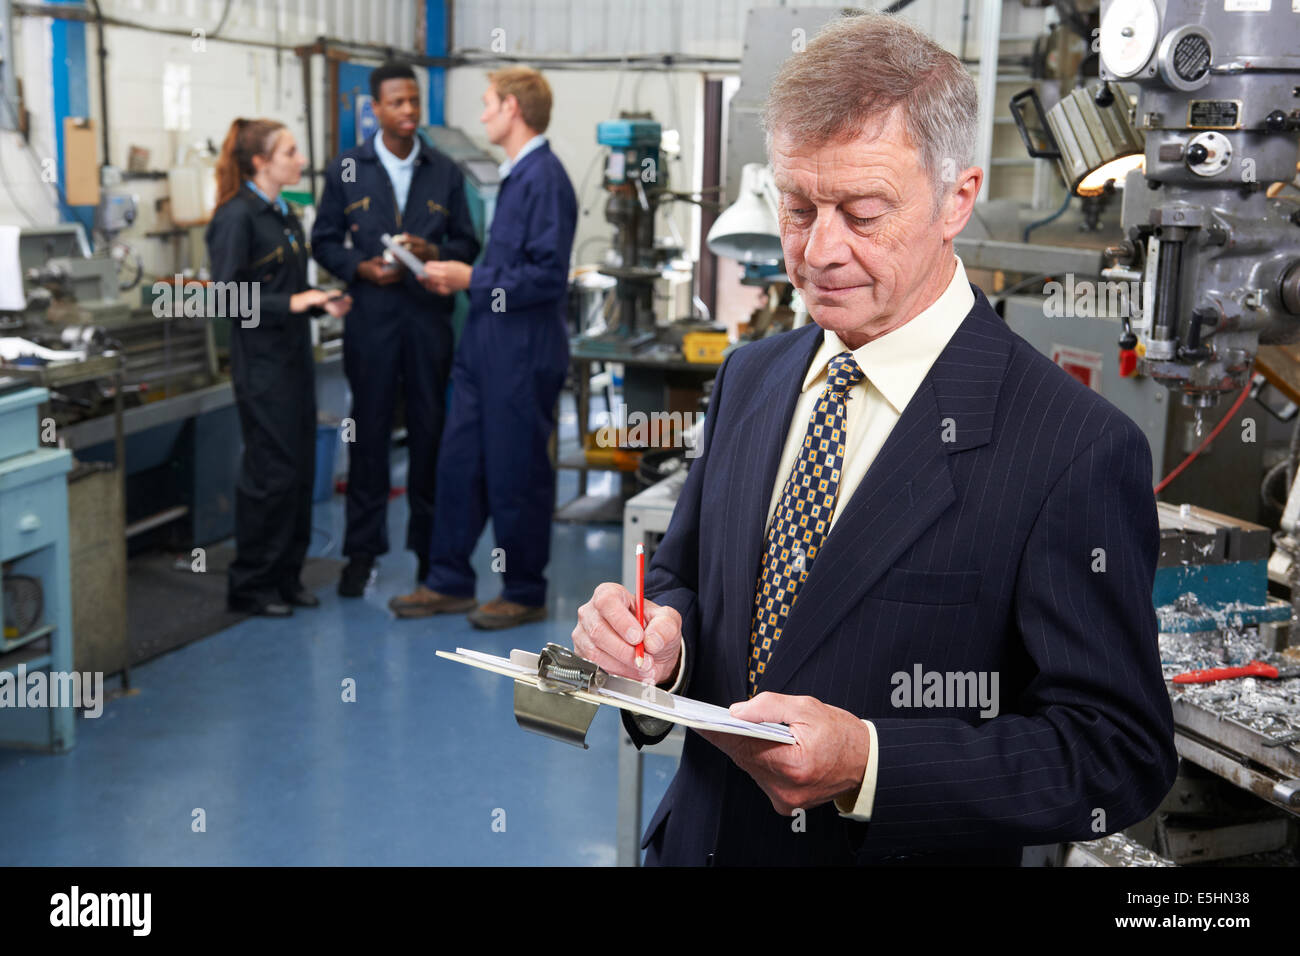 Owner Of Engineering Factory With Staff In Background Stock Photo